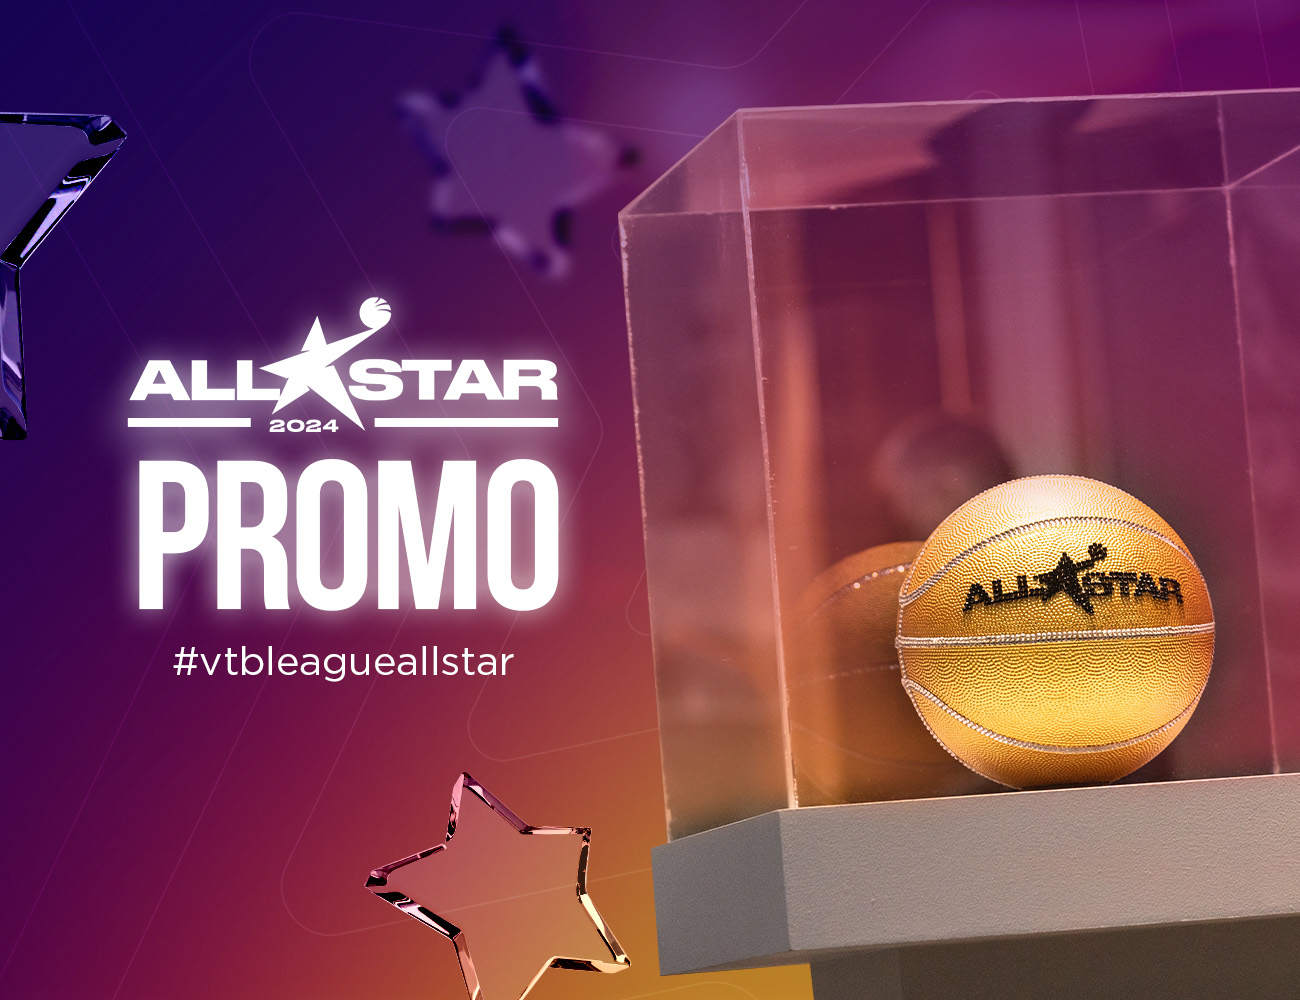 VTB United League and Match TV present the All-Star Game 2024 Promo